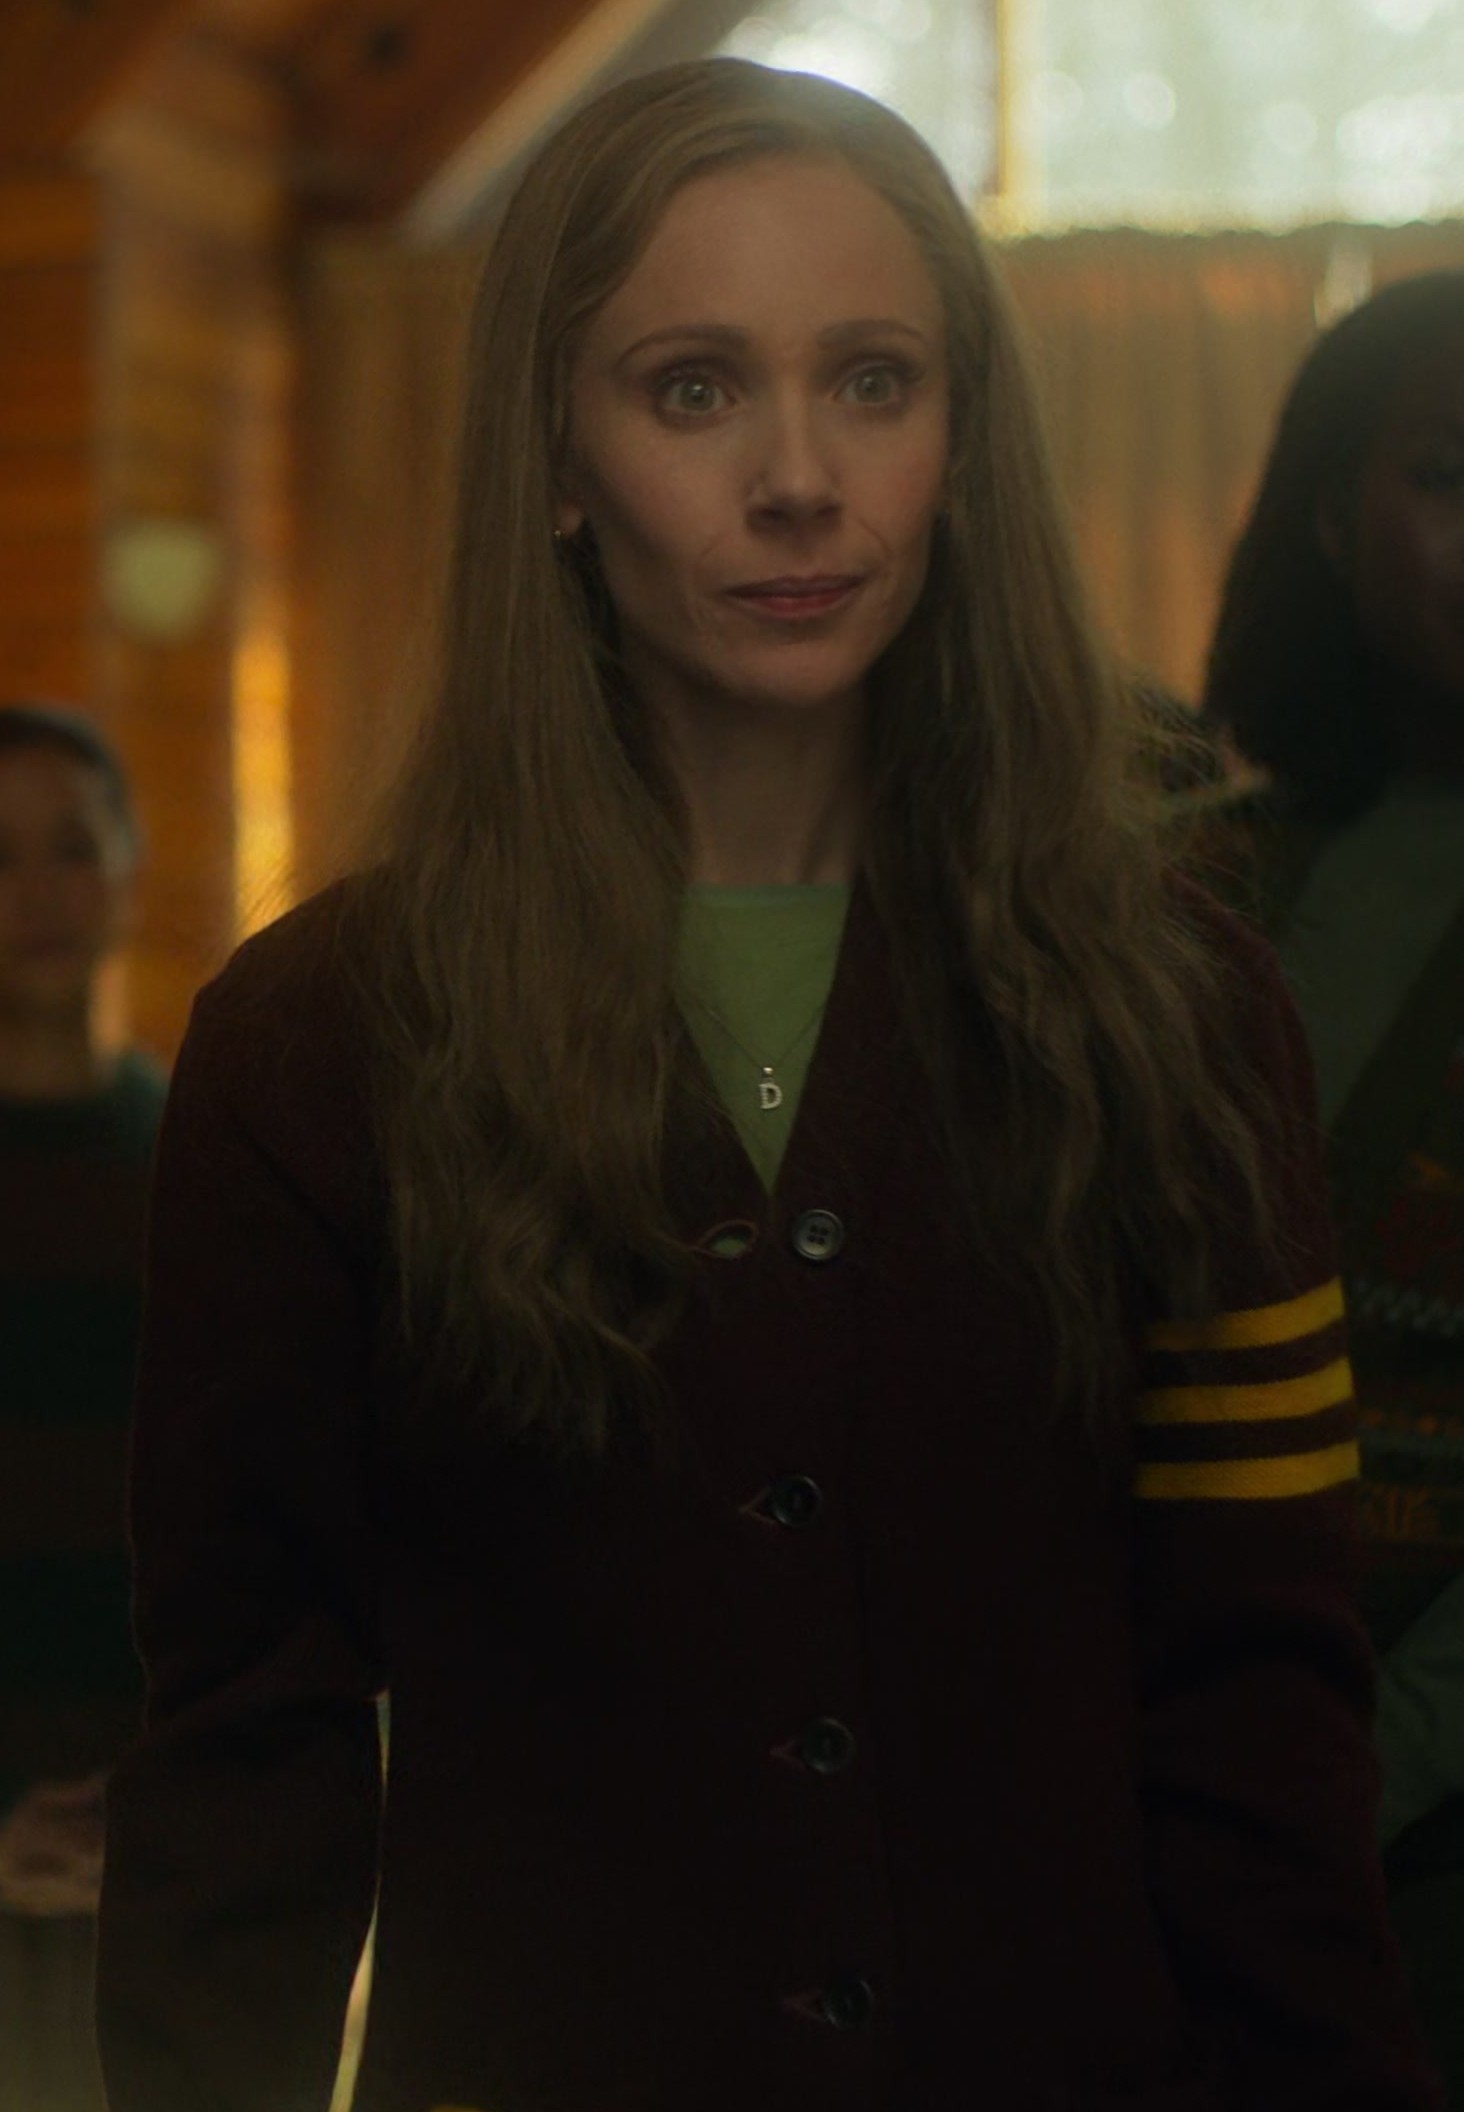 Worn on Fargo TV Show - Brown Button-Up Cardigan with Contrast Sleeve Stripes of Juno Temple as Dorothy "Dot" Lyon / Nadine Bump